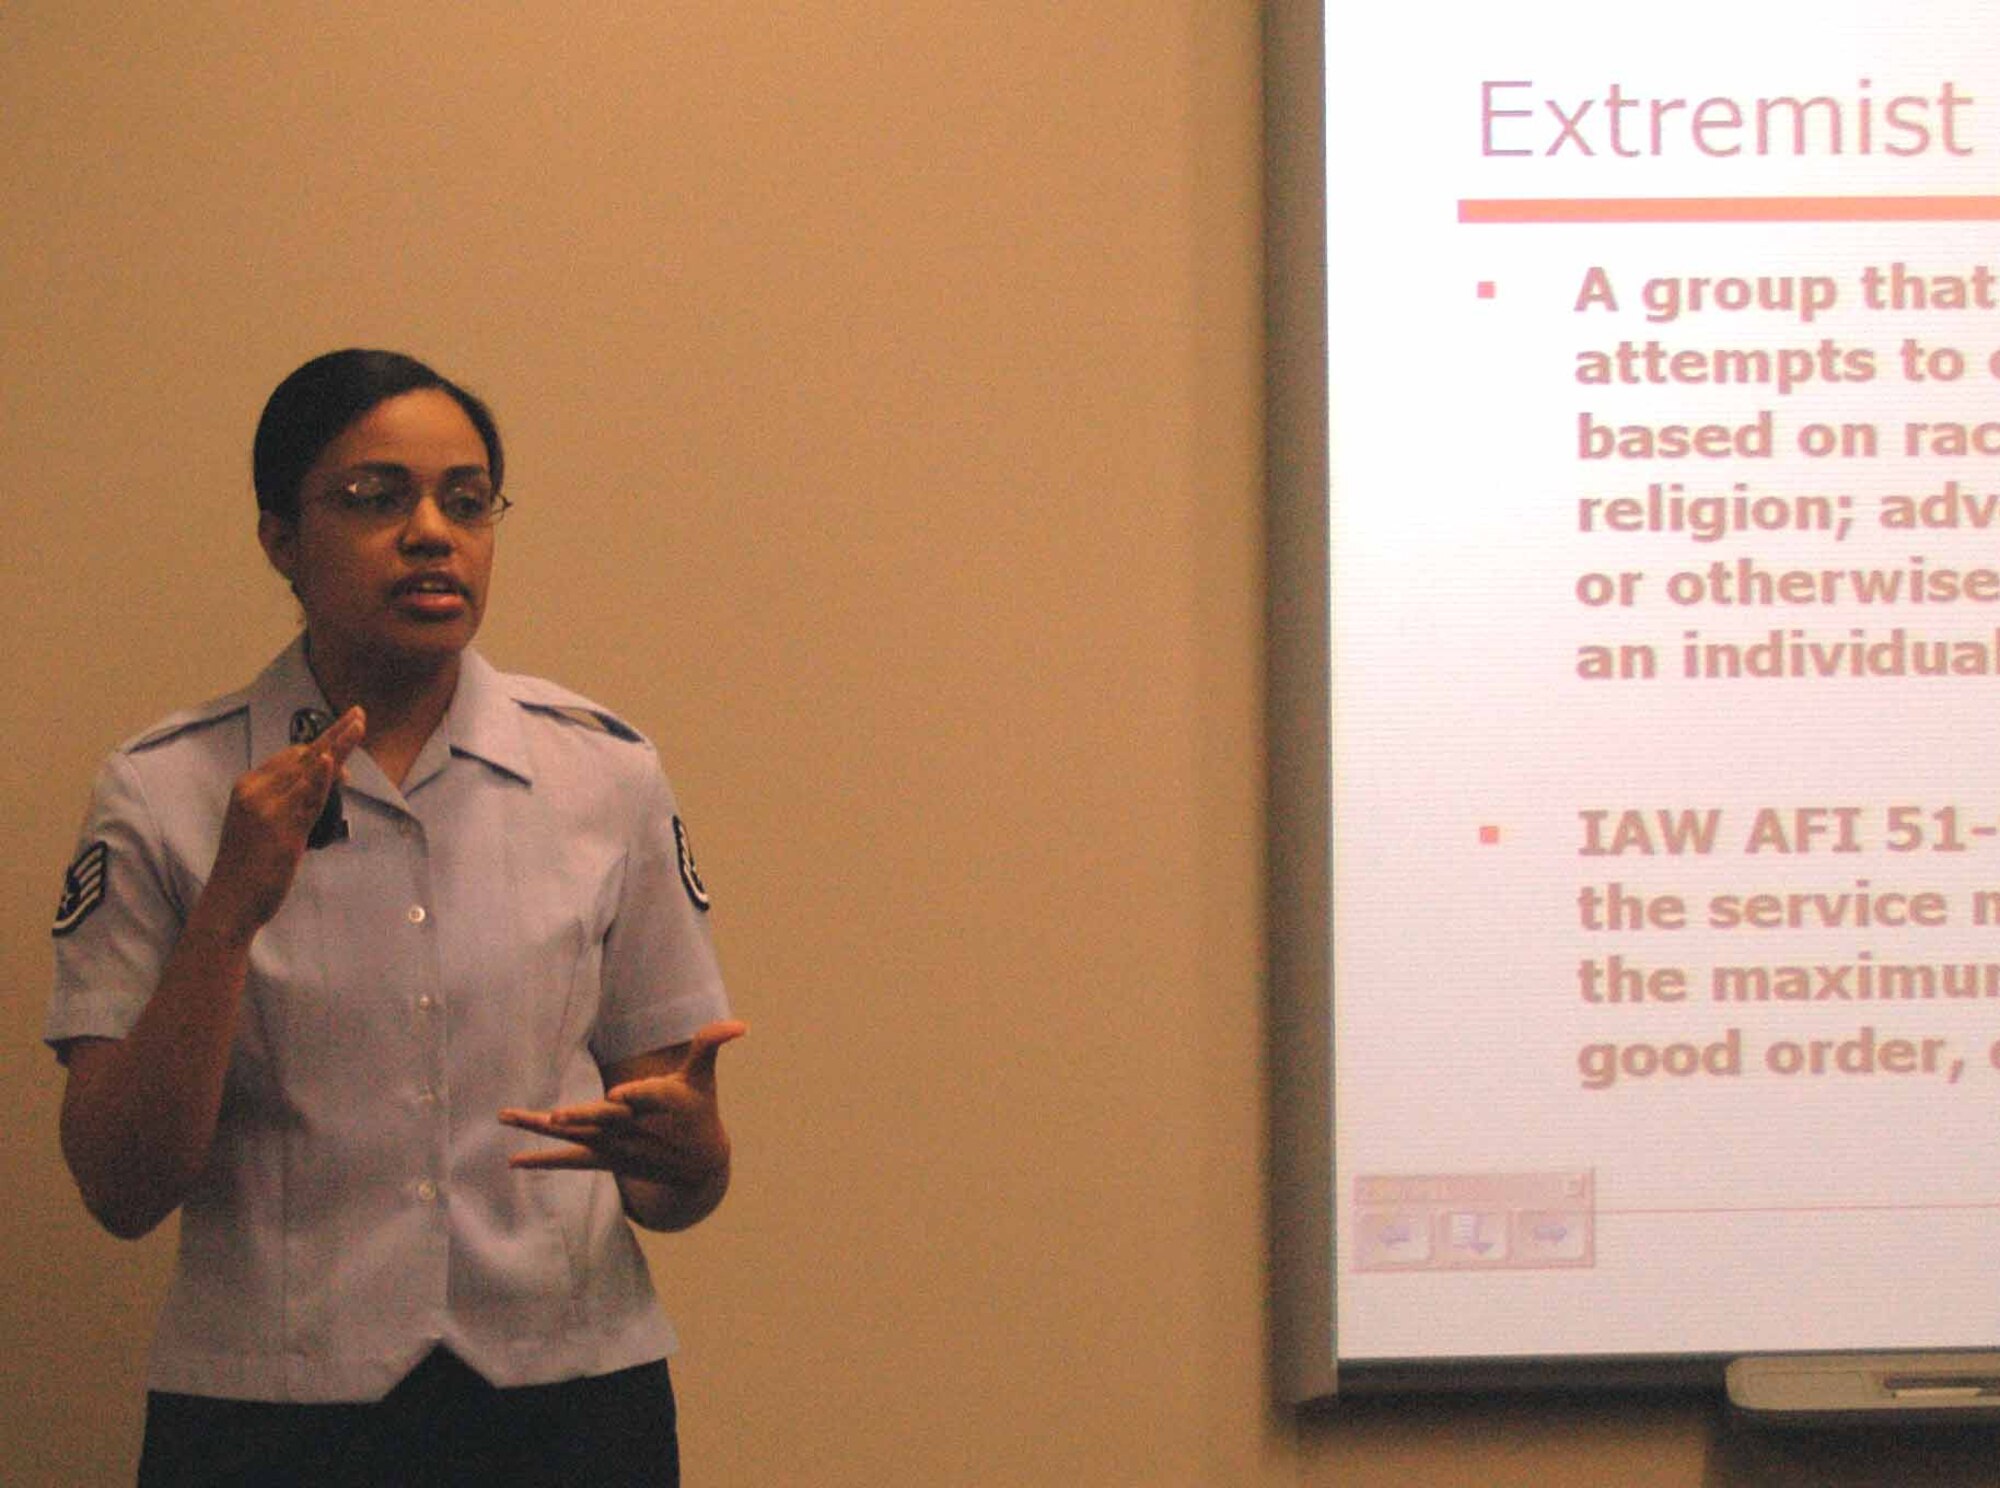 Military Equal Opportunity Staff Sgt. Jasmine Barnes identifies the extremist groups in Oklahoma in a newcomer's briefing Sept. 28 at the Family Support Center. (Air Force photo by Kandis West)